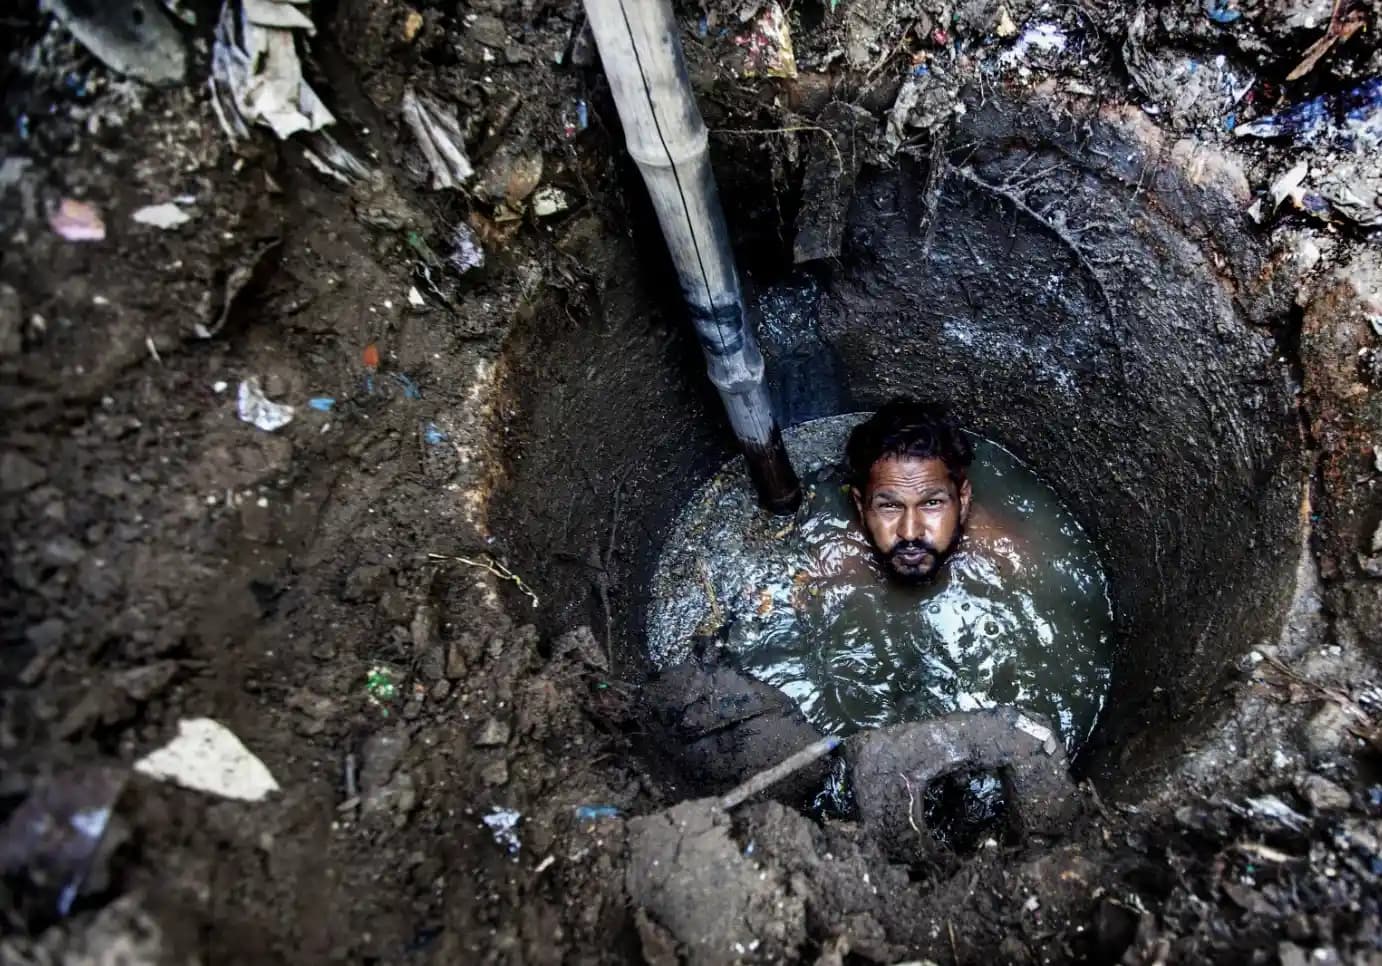 The Challenging Lives of Illegal Sewer Cleaners in India